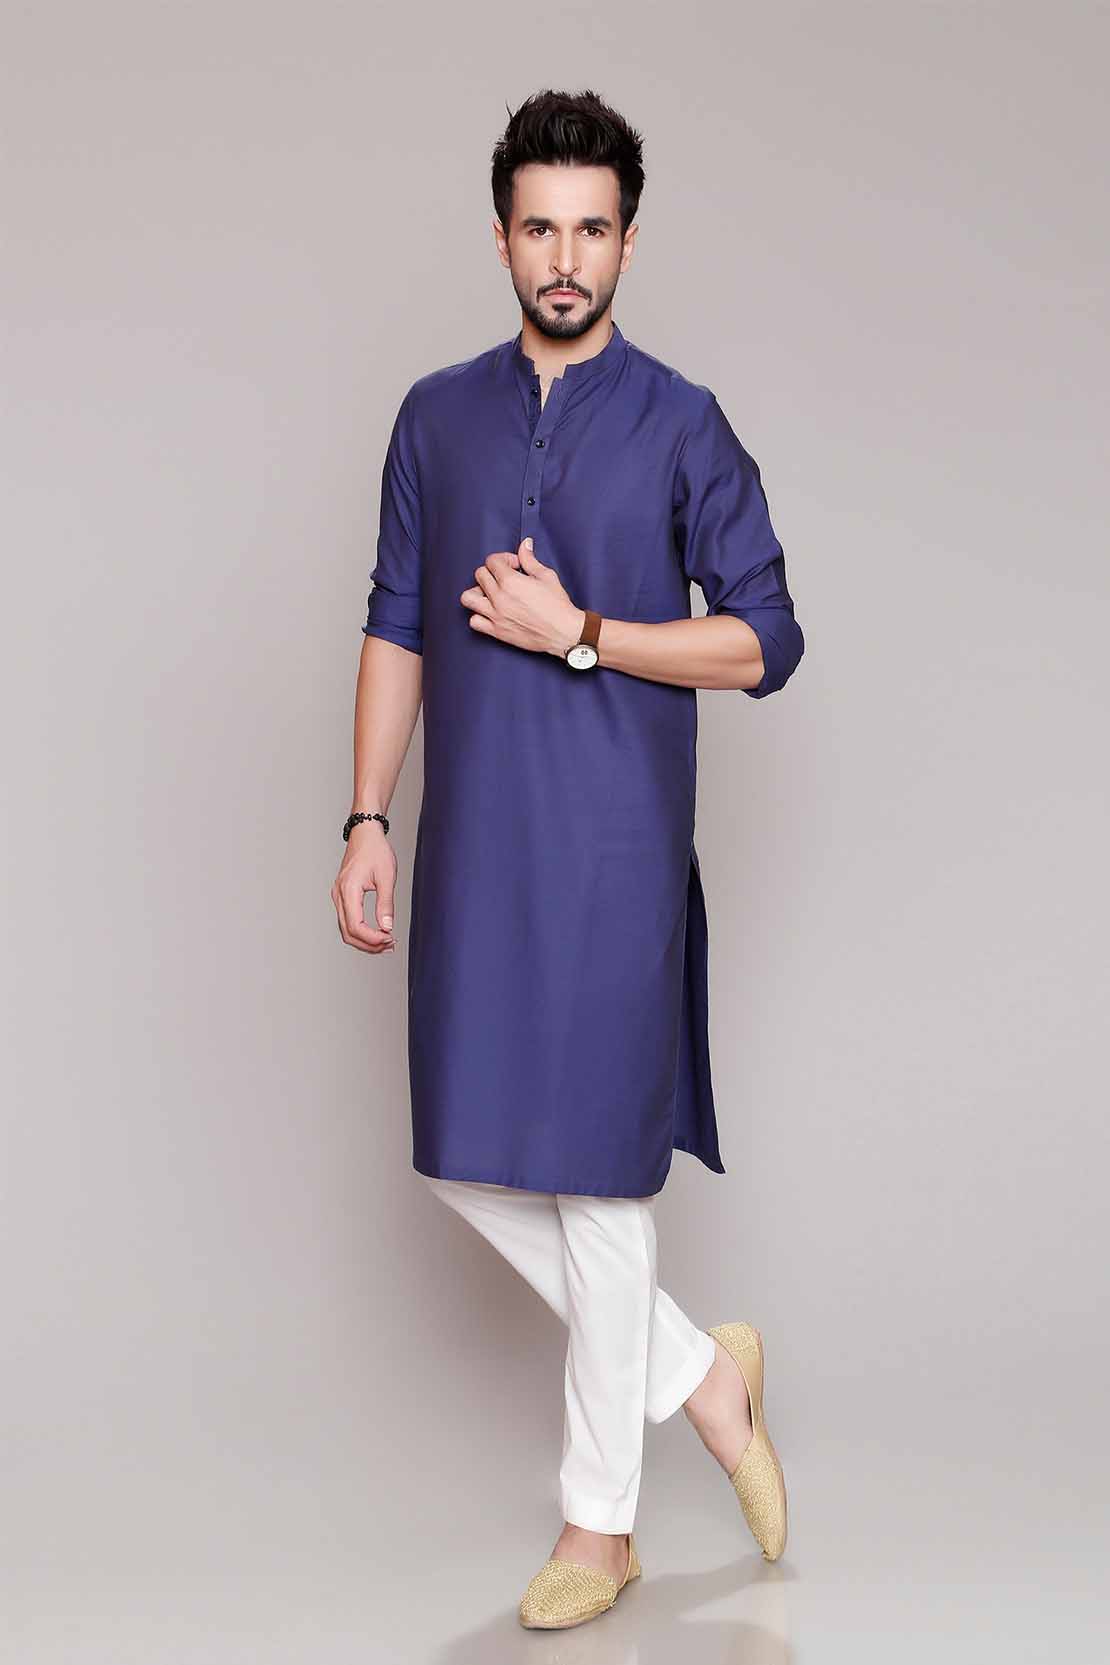 Latest Men Modern Kurta Styles Designs Collection 2019 by Chinyere